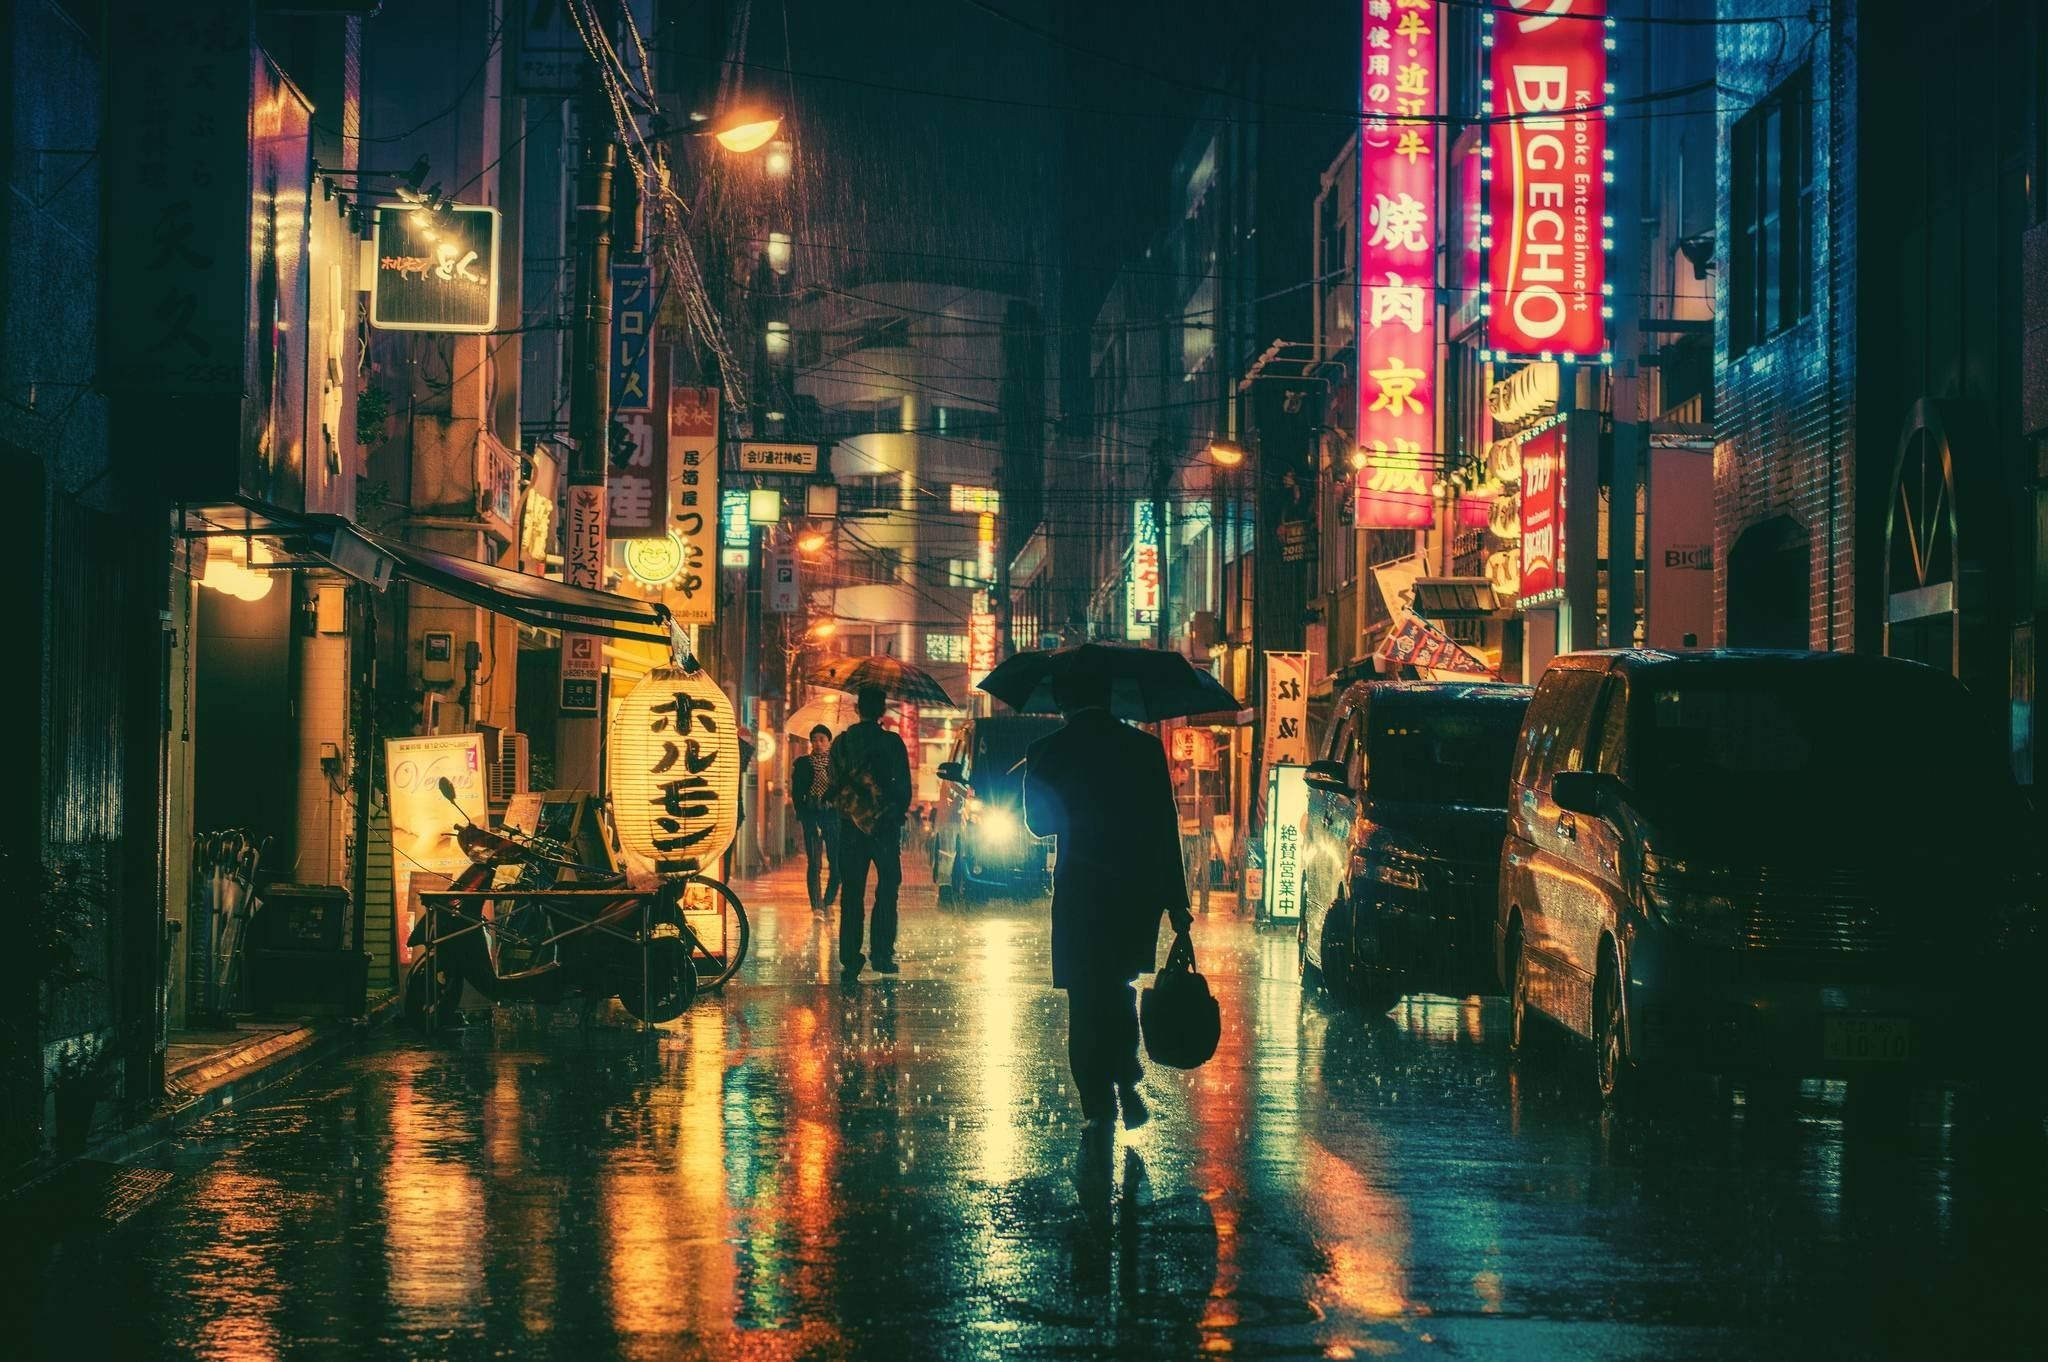 A person walking down the street at night - Japan, Tokyo